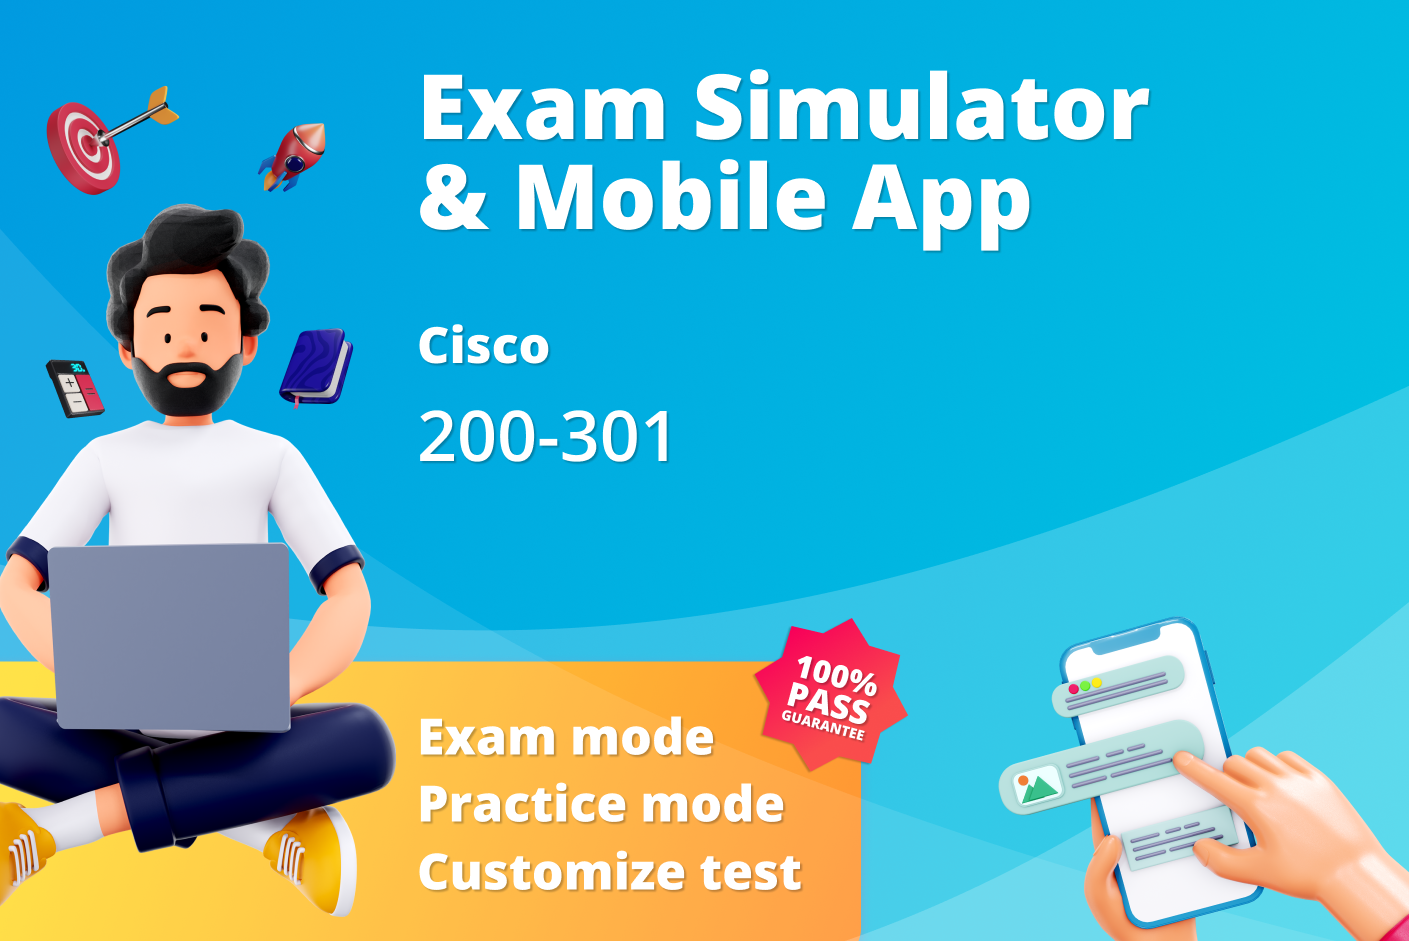 Cisco 200-301 mock test: Prepare for success with our expertly designed practice exams